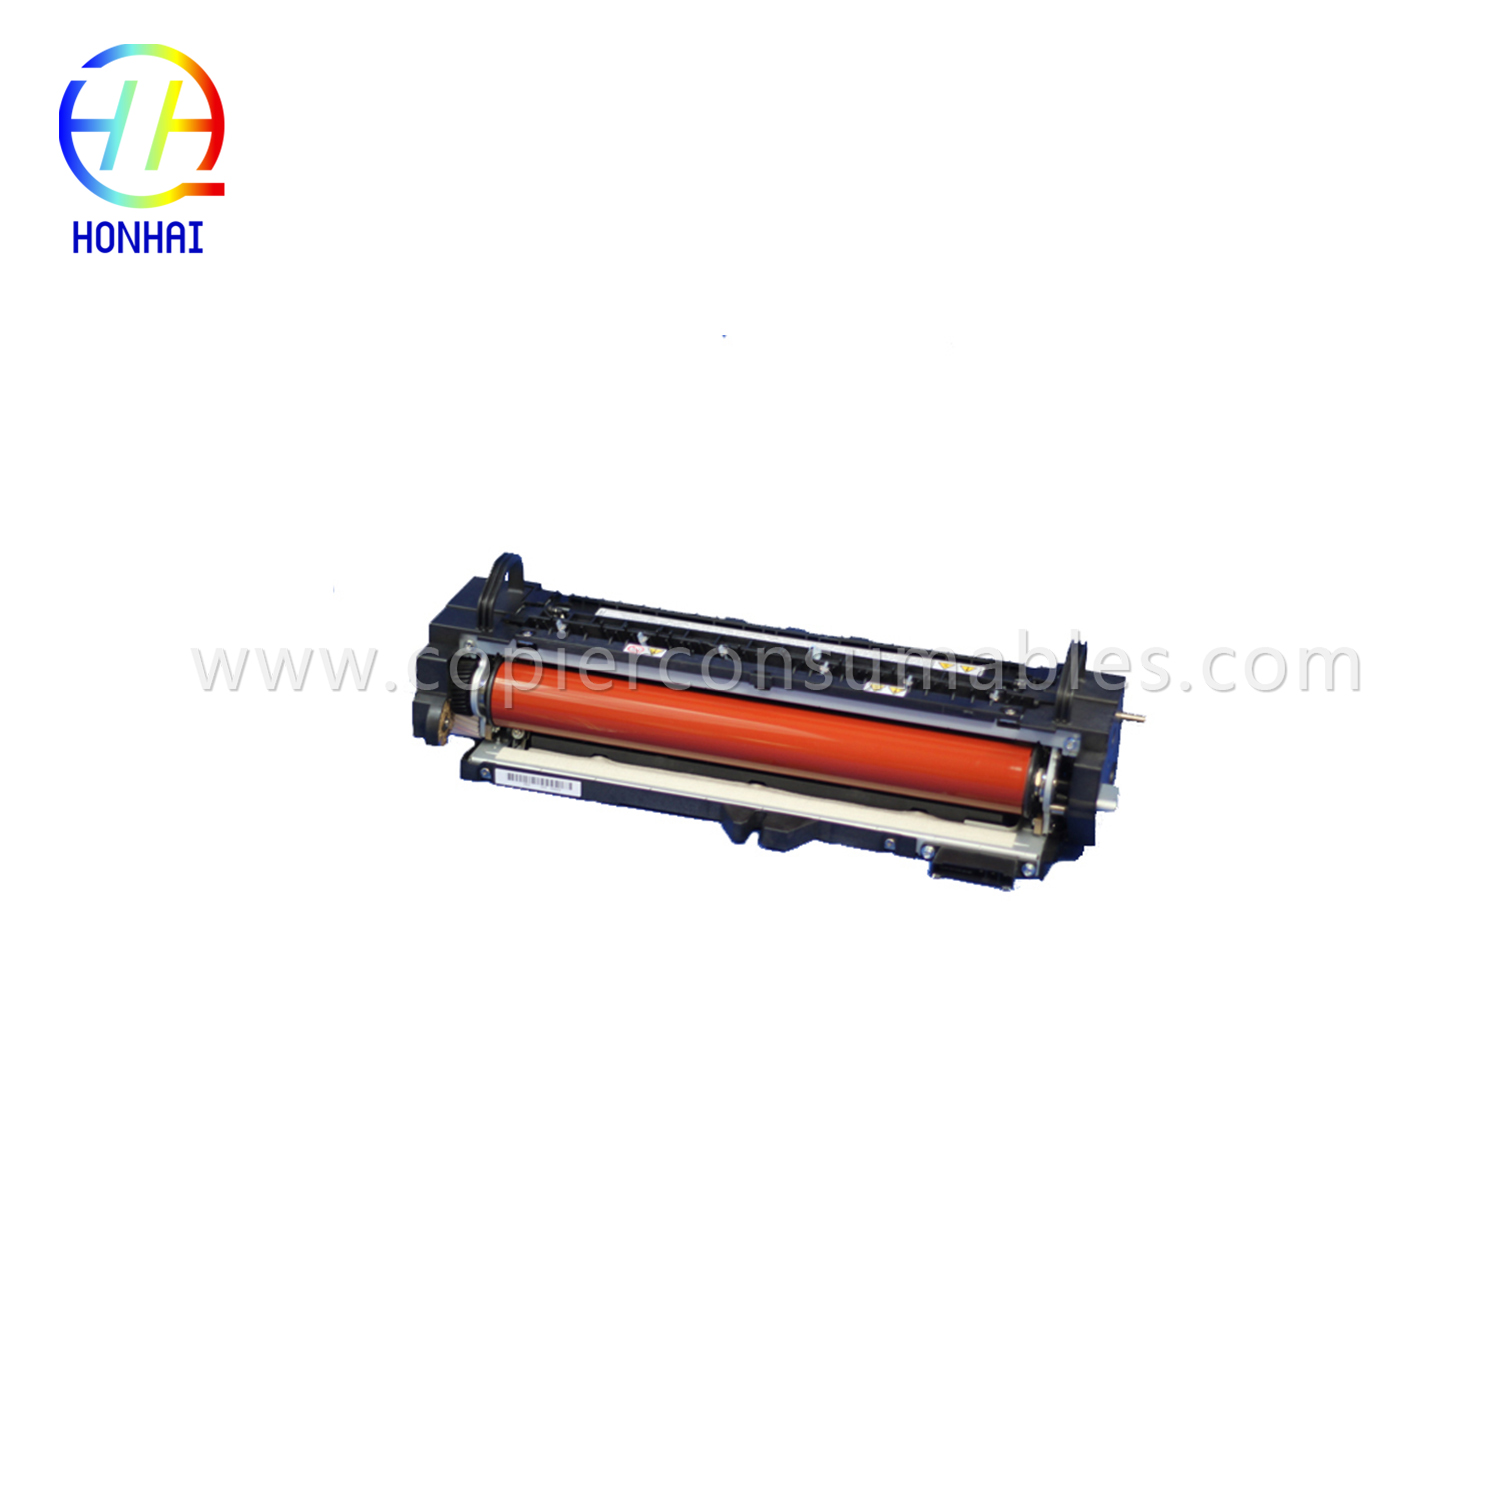 Fuser Film Assembly for Ricoh Mpc 3001